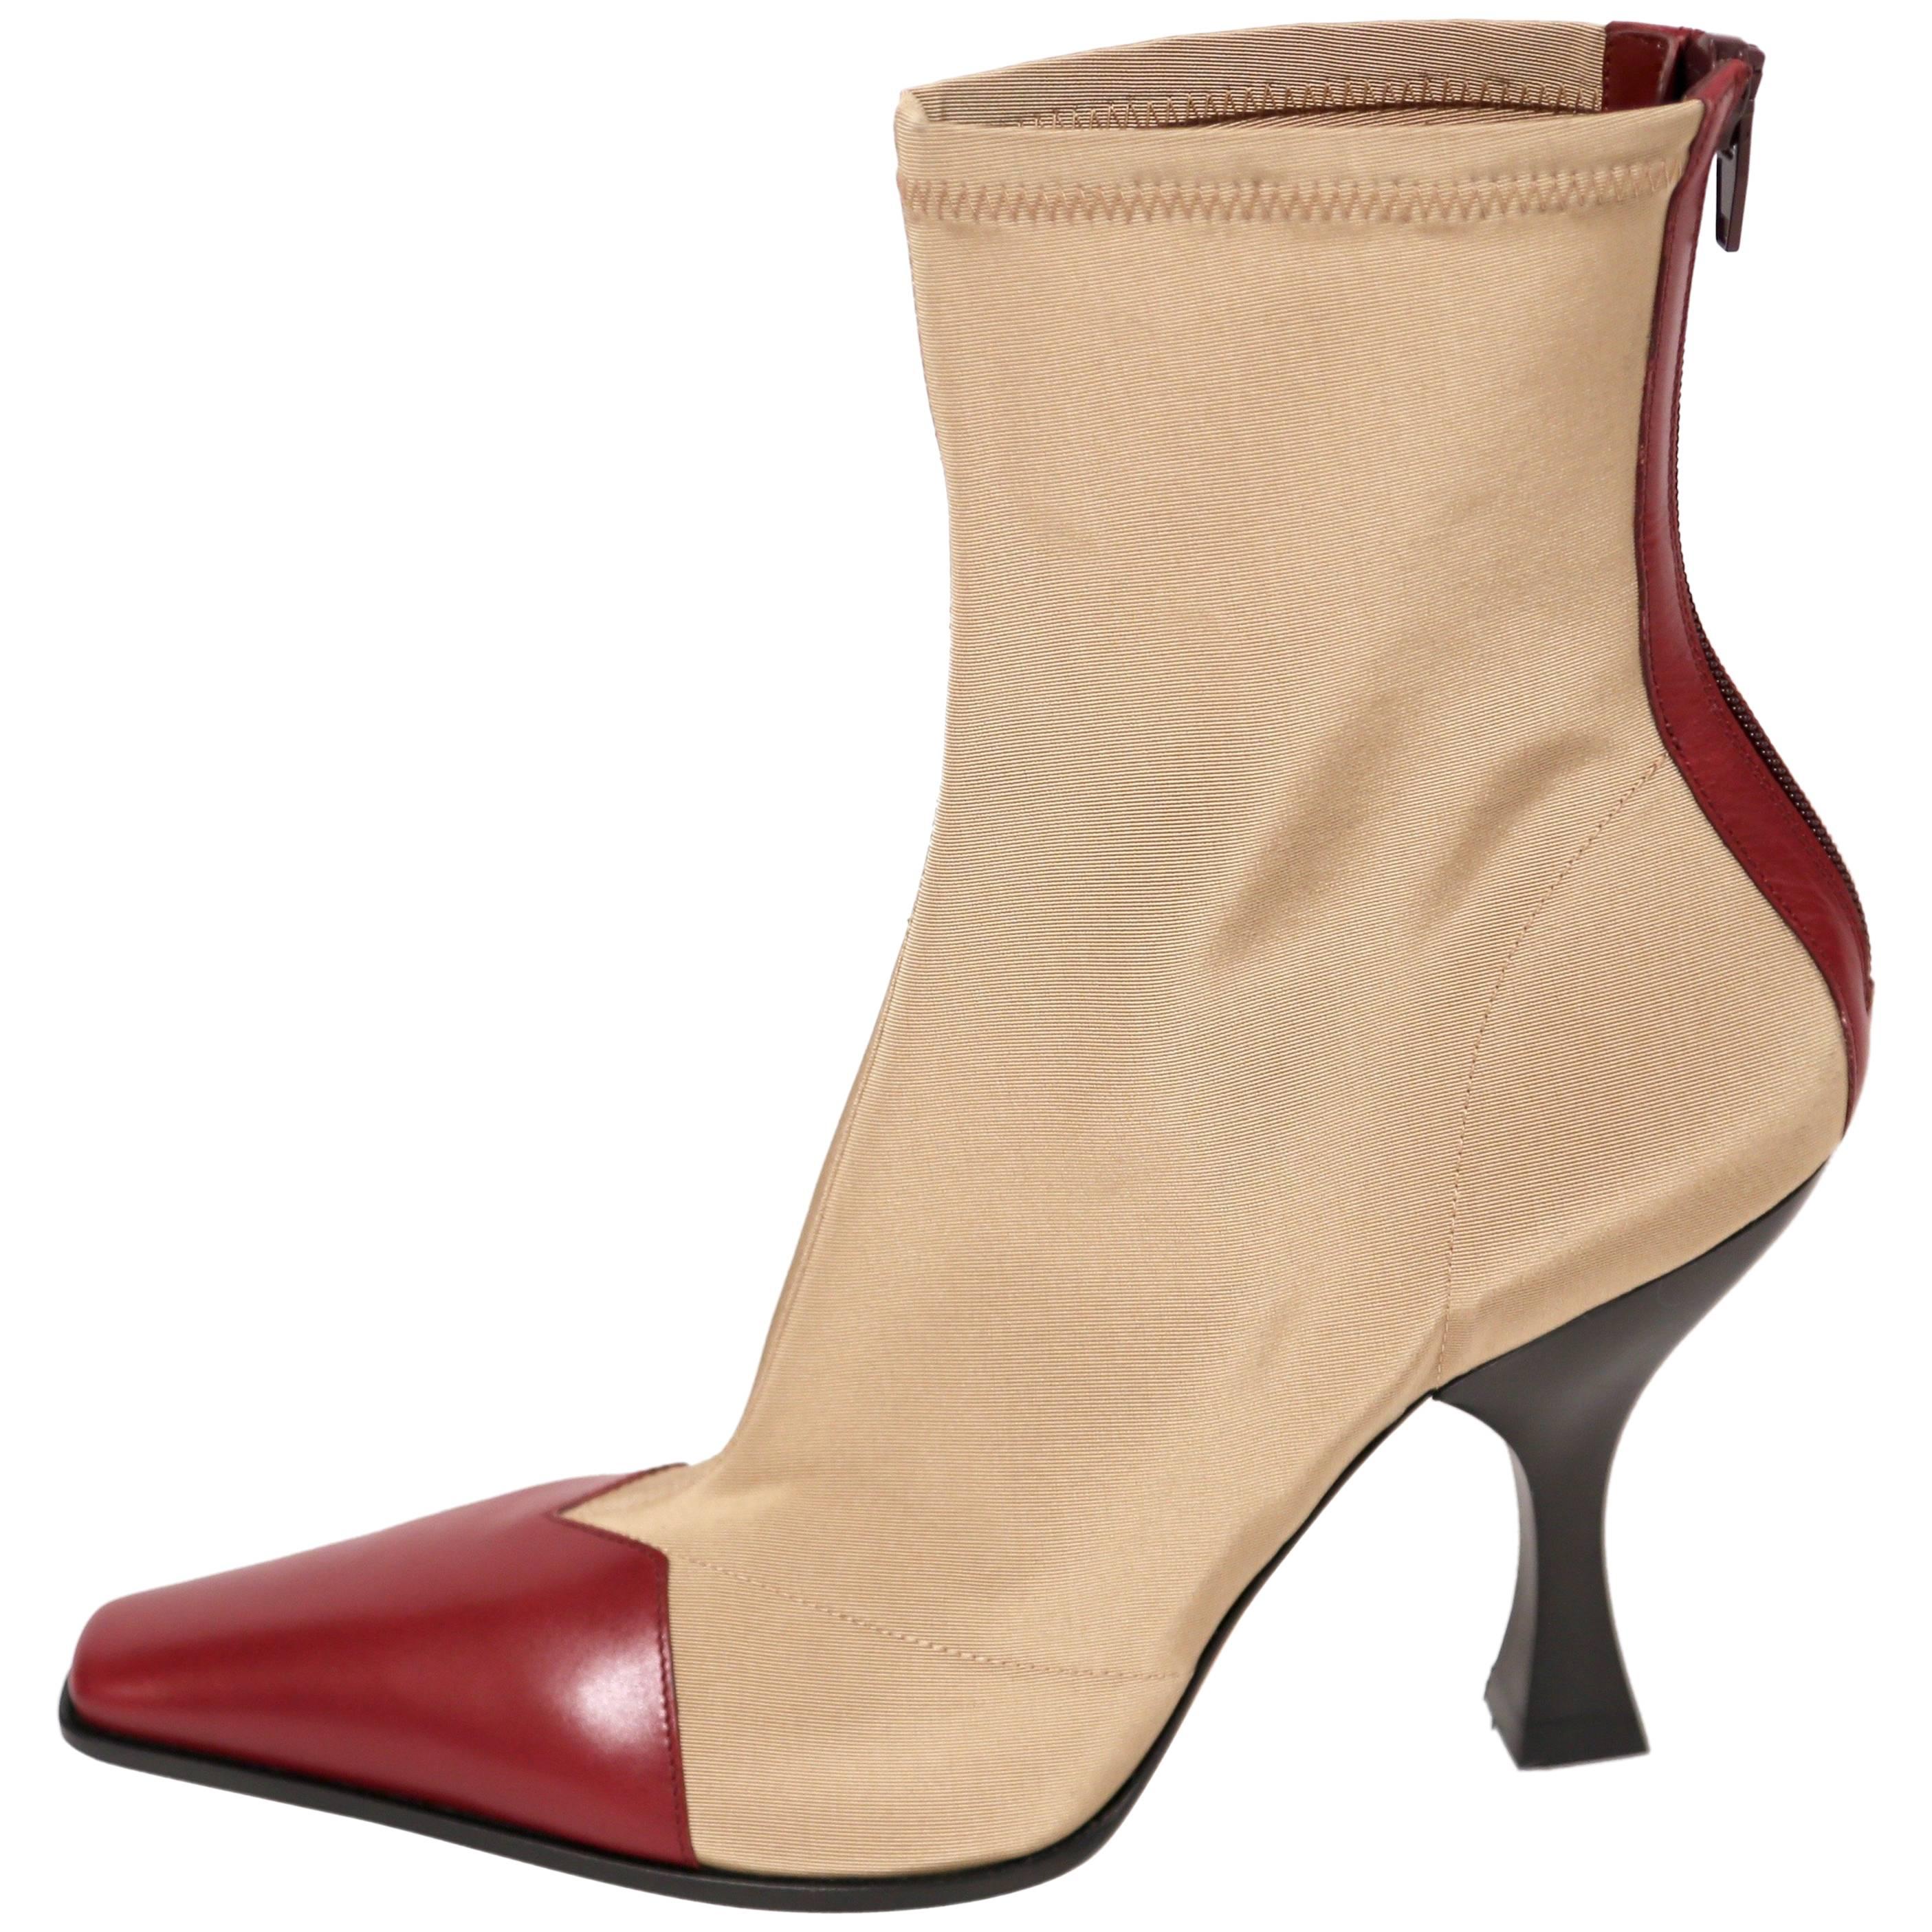 Phoebe Philo tan 'Madame' ankle boots 